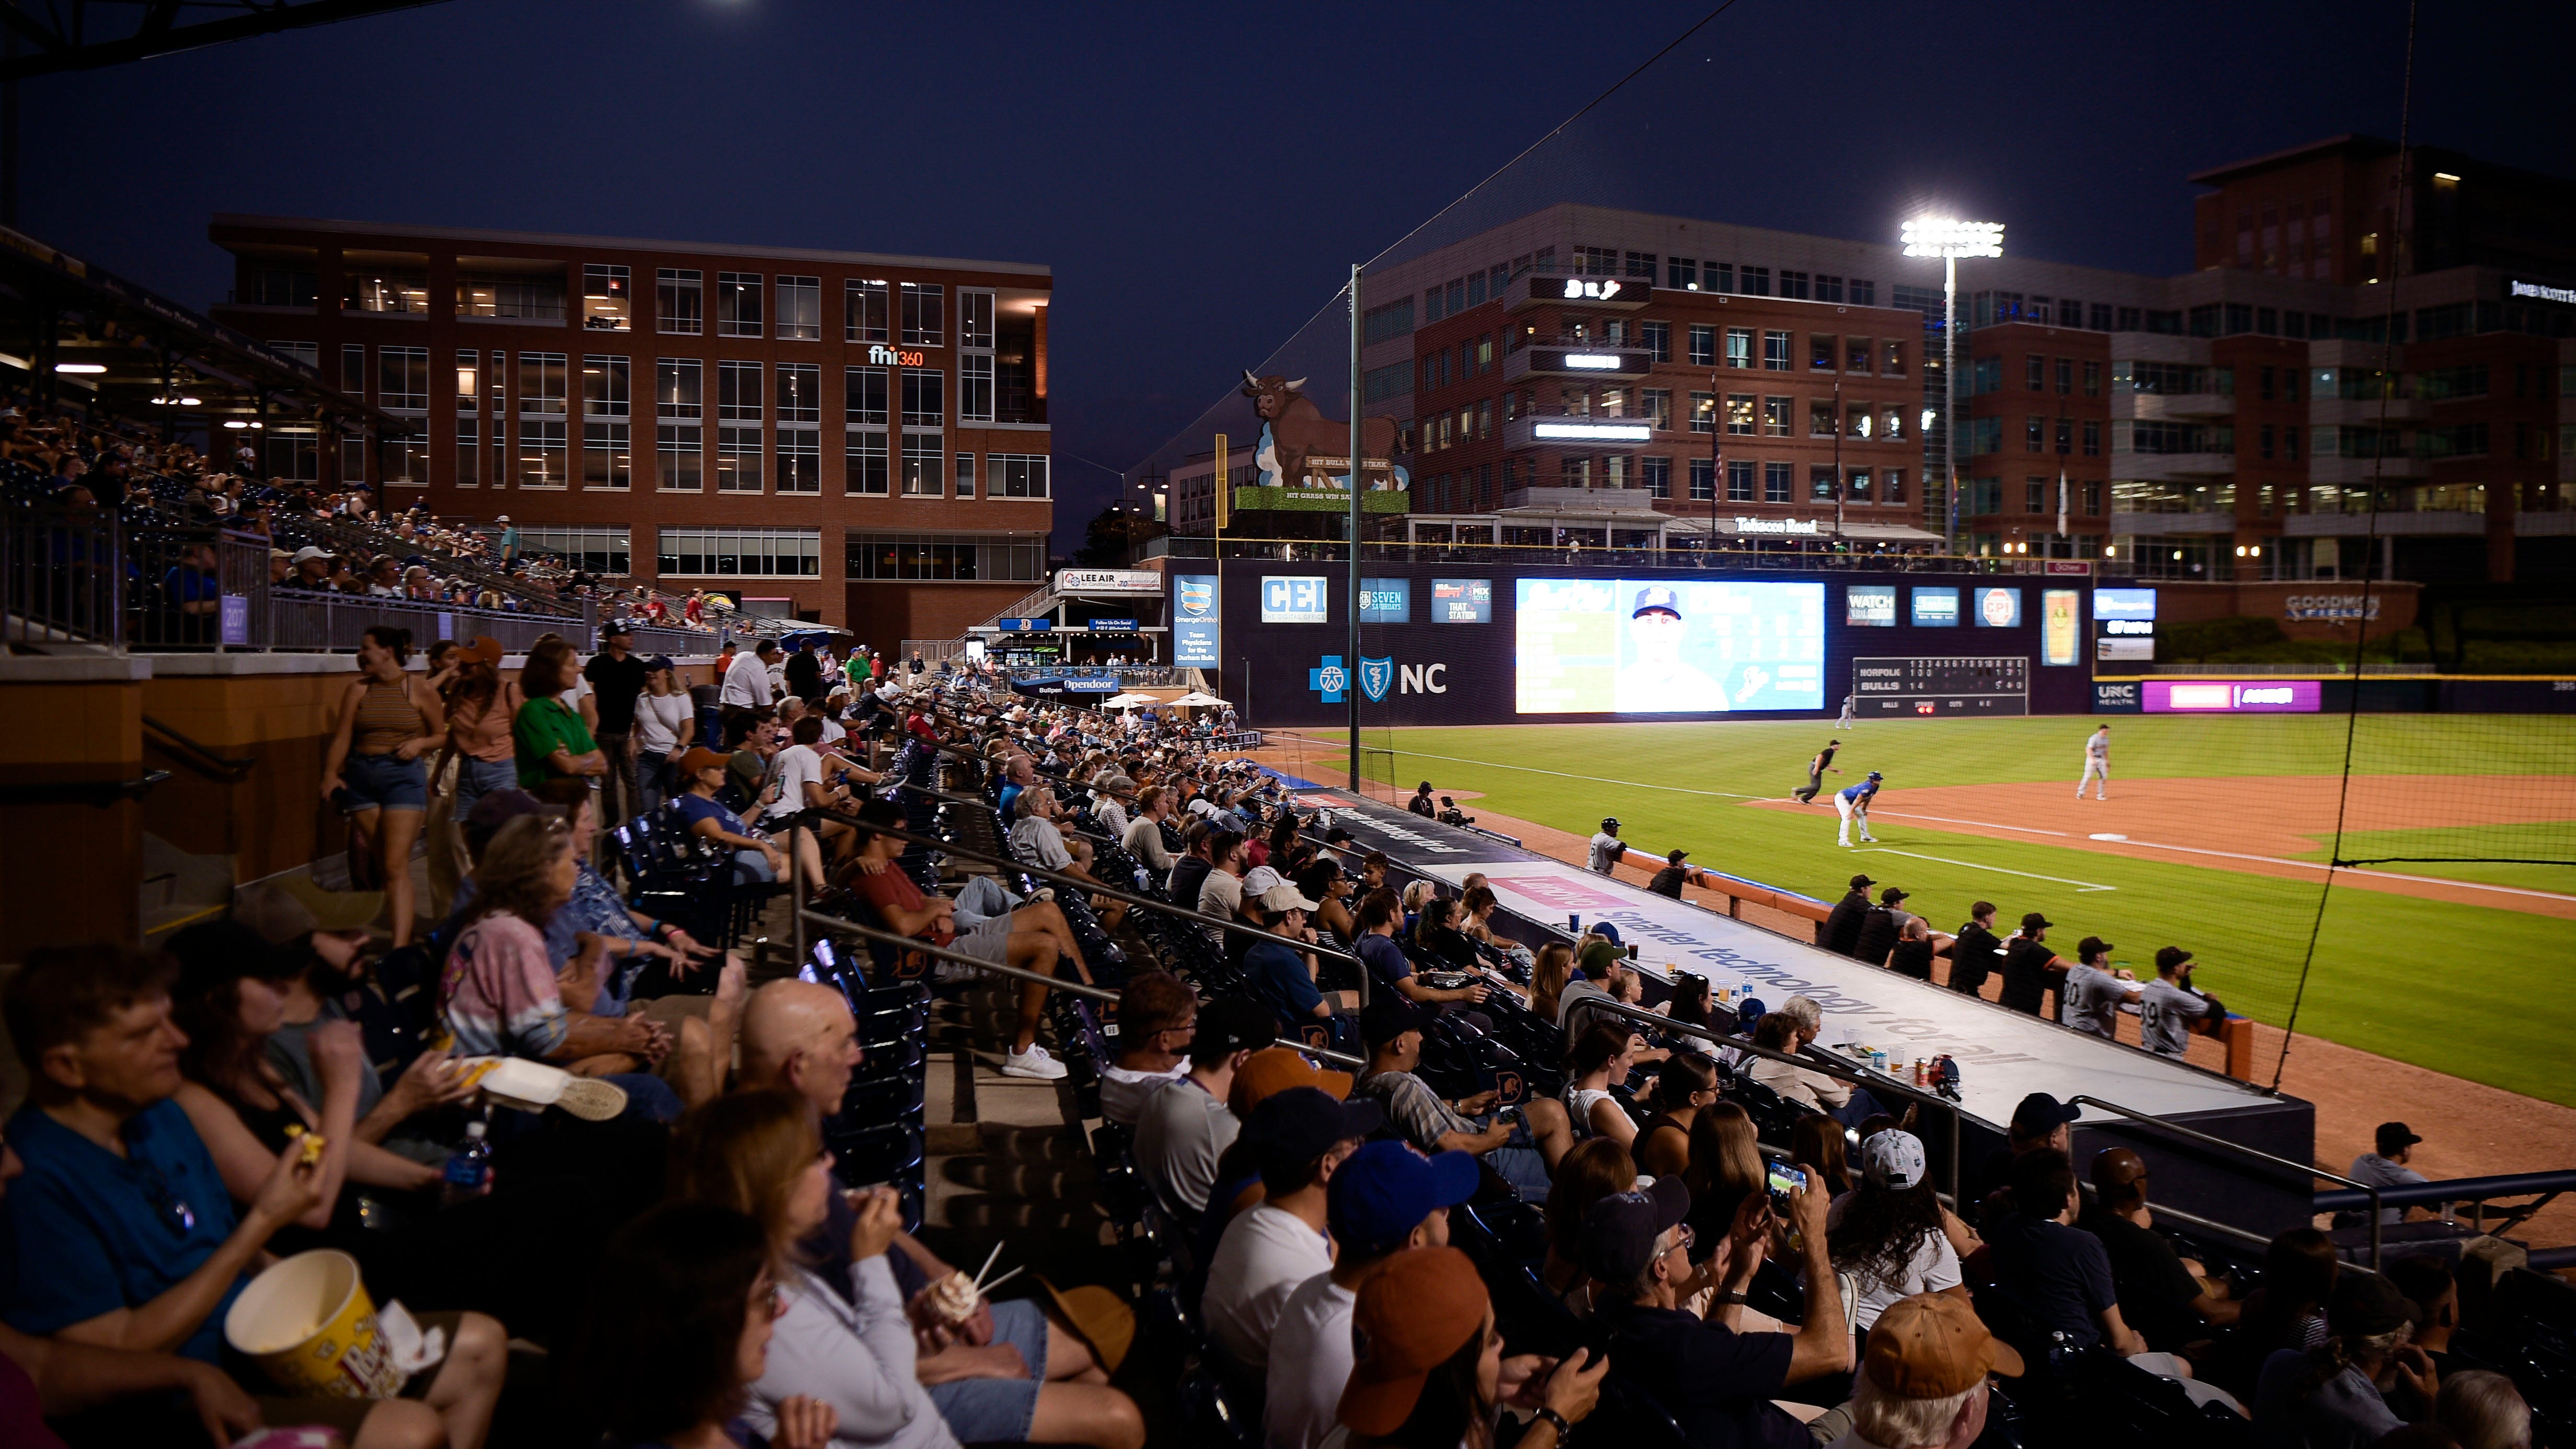 For one night, the Durham Bulls will transform into the Durham